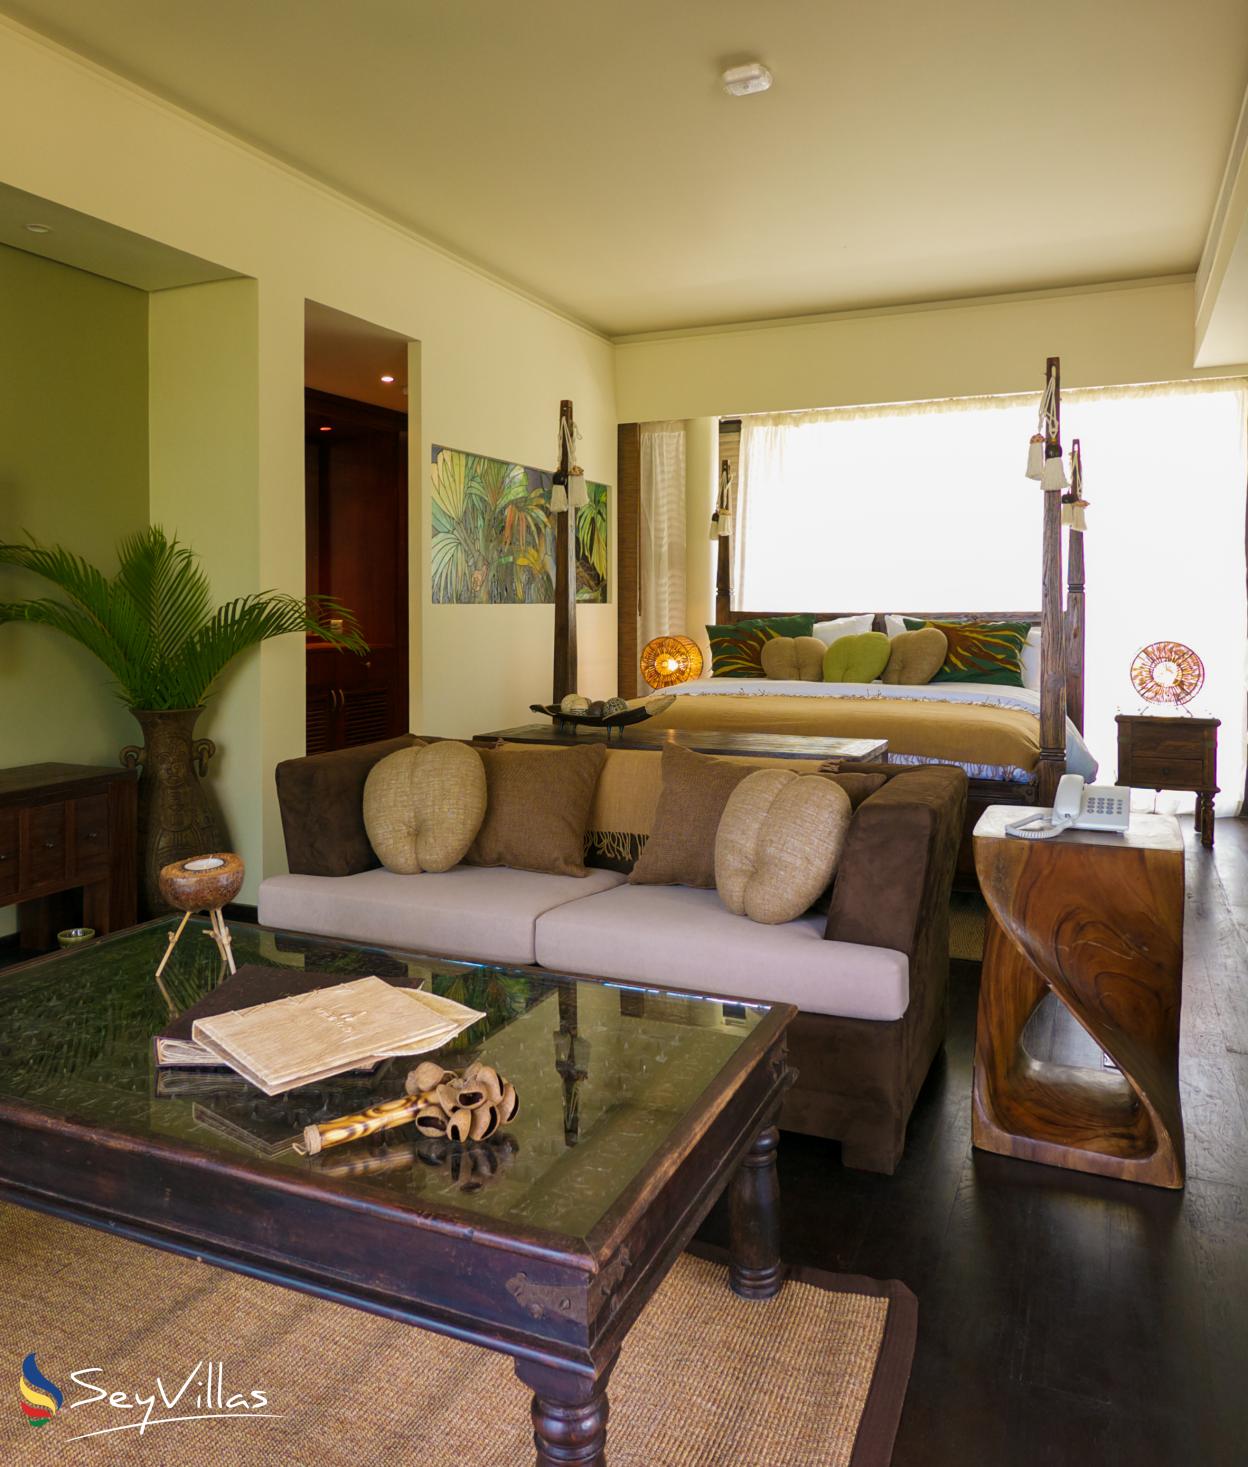 Photo 72: Dhevatara Beach Hotel - Classic Suite with Kingsize Bed - Praslin (Seychelles)